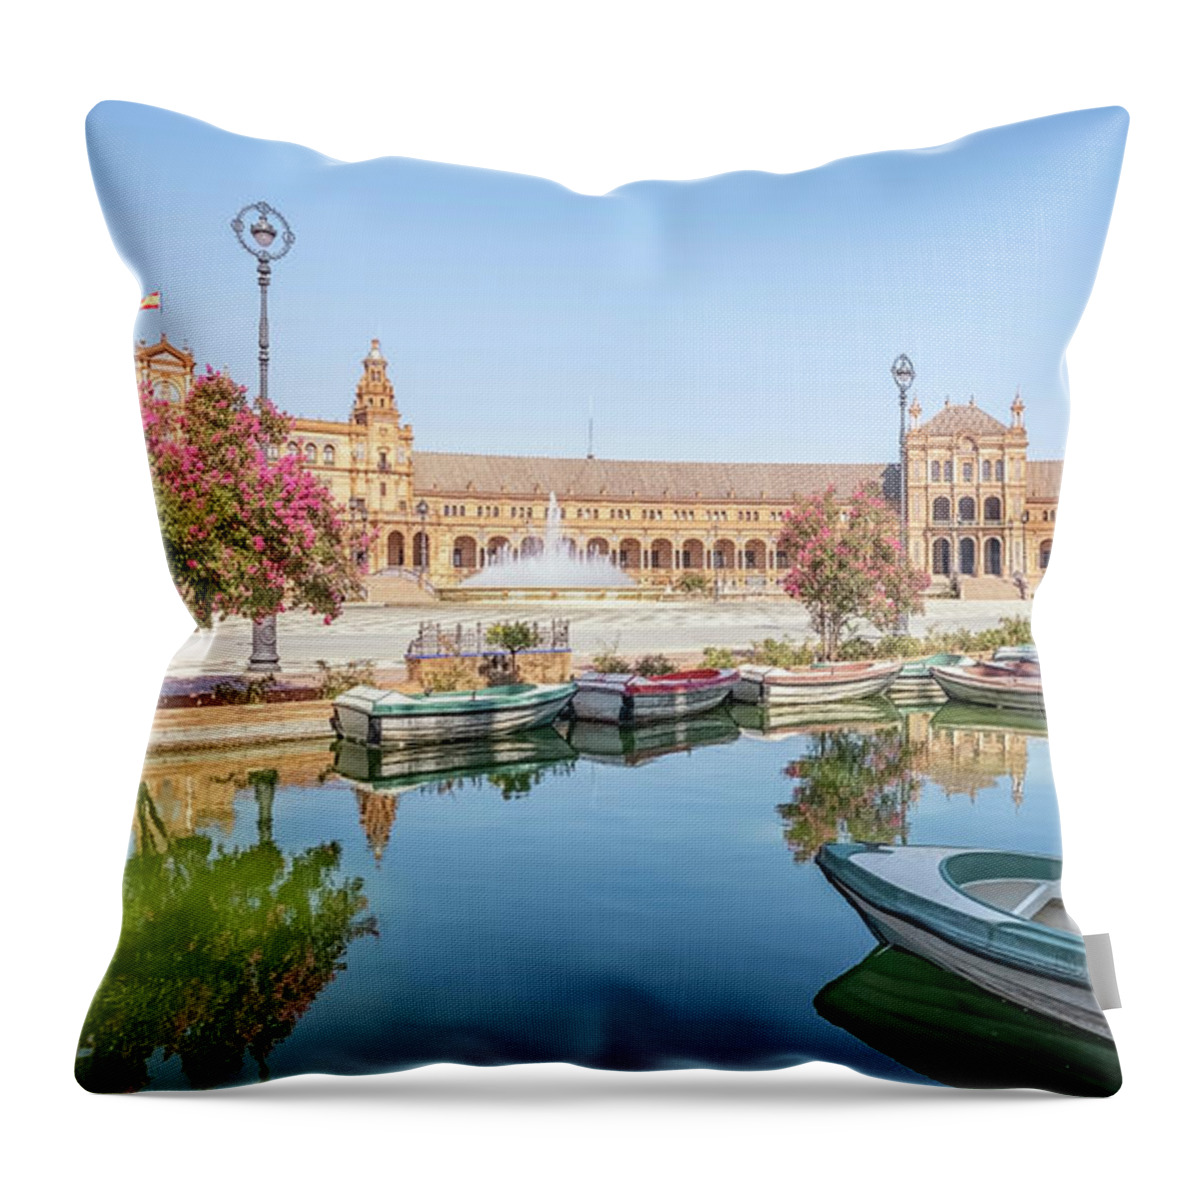 Seville Throw Pillow featuring the photograph Seville City by Manjik Pictures